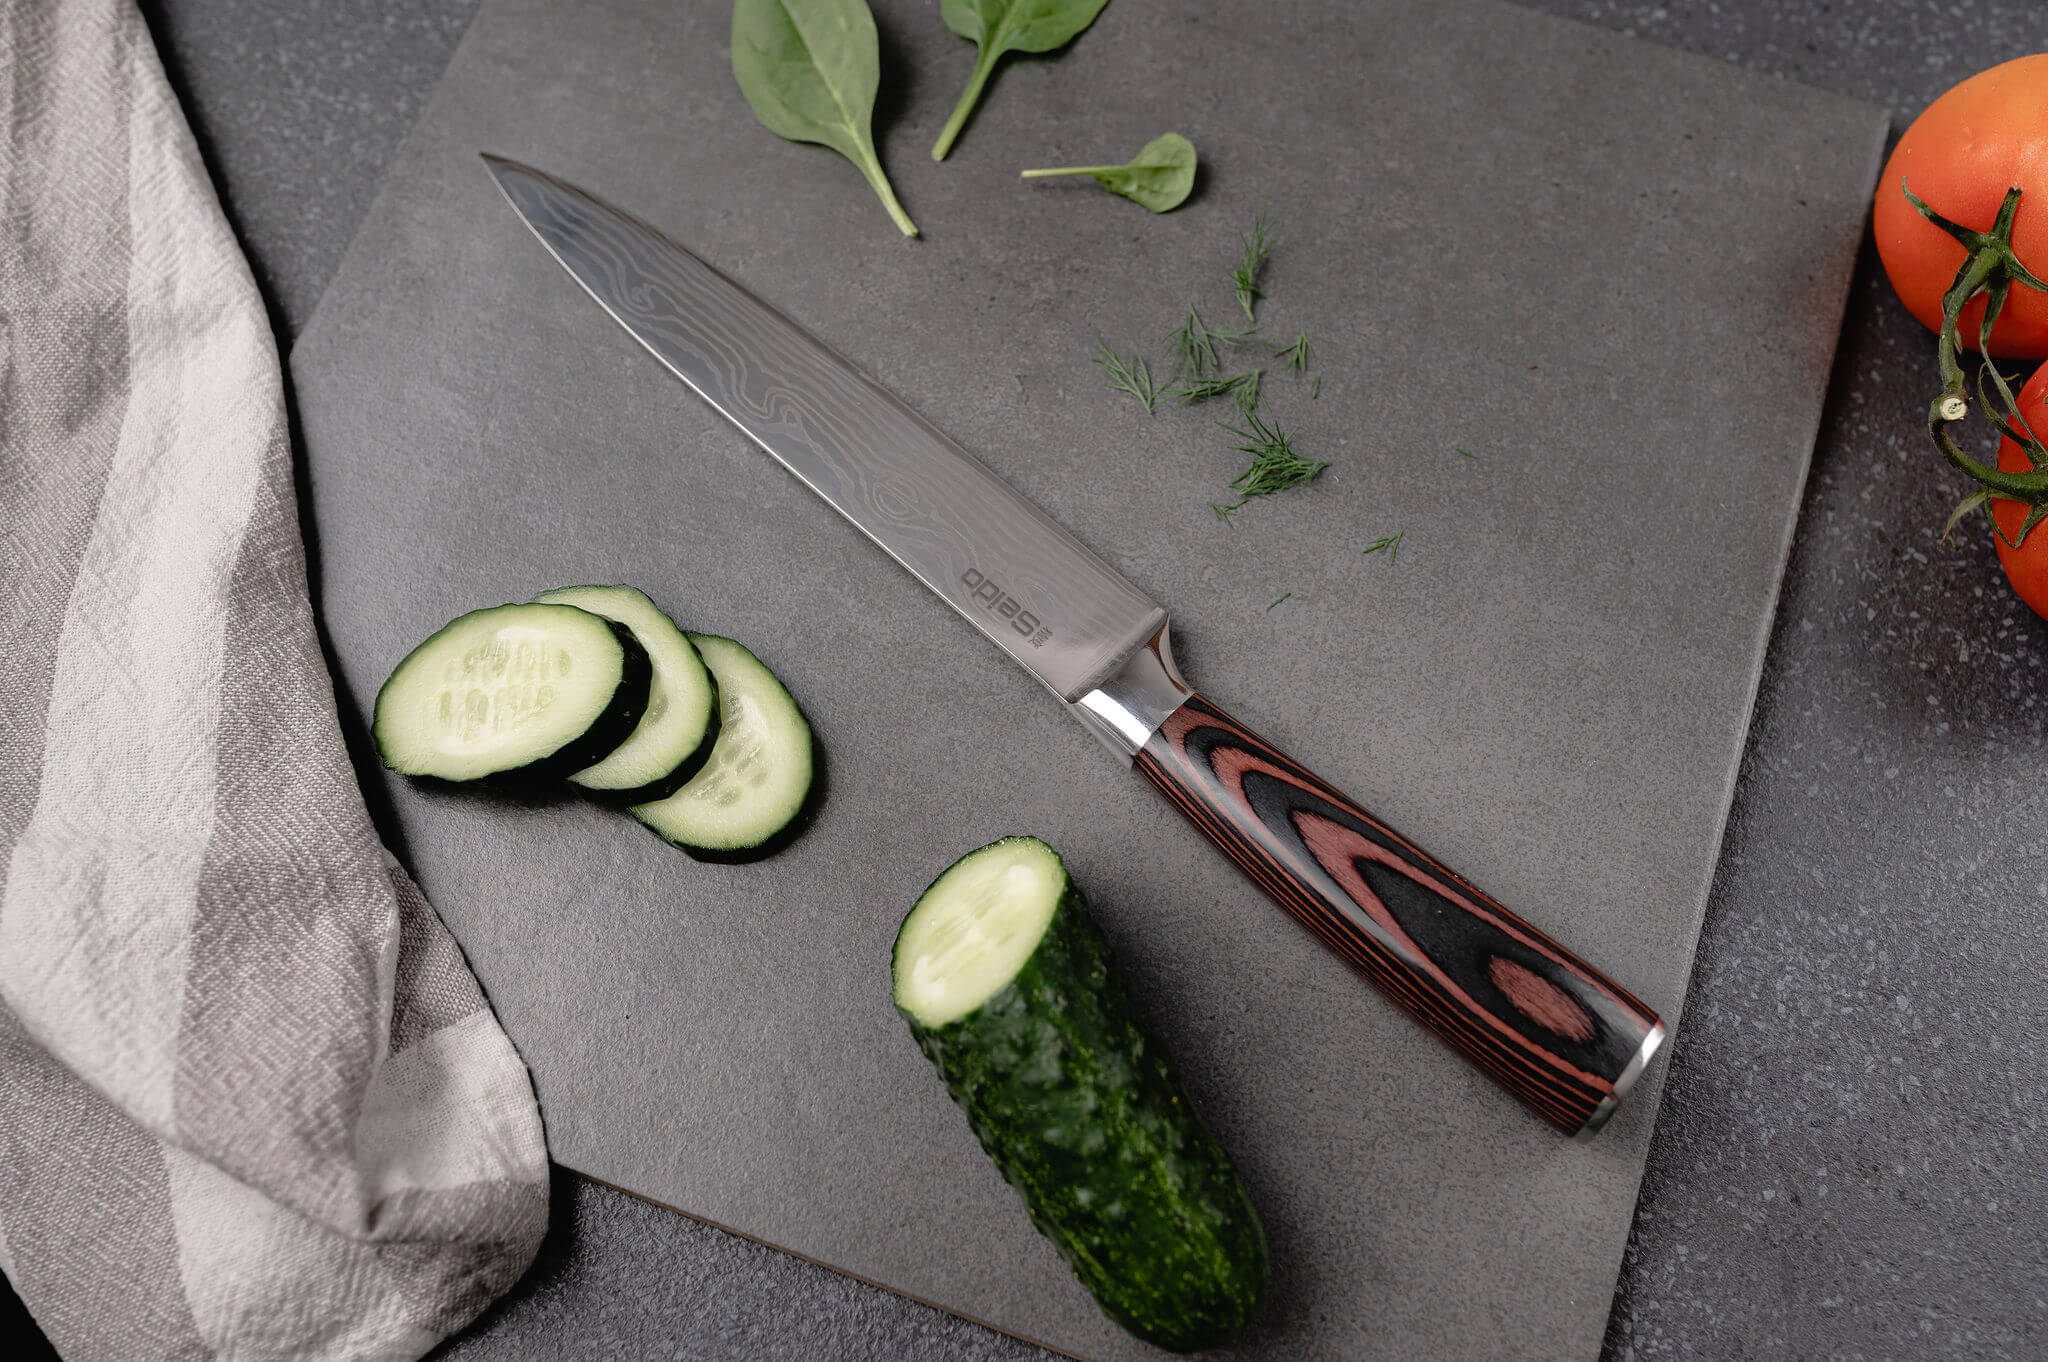 A Seido knife and fresh cucumbers on a cutting board, ready for slicing and dicing!